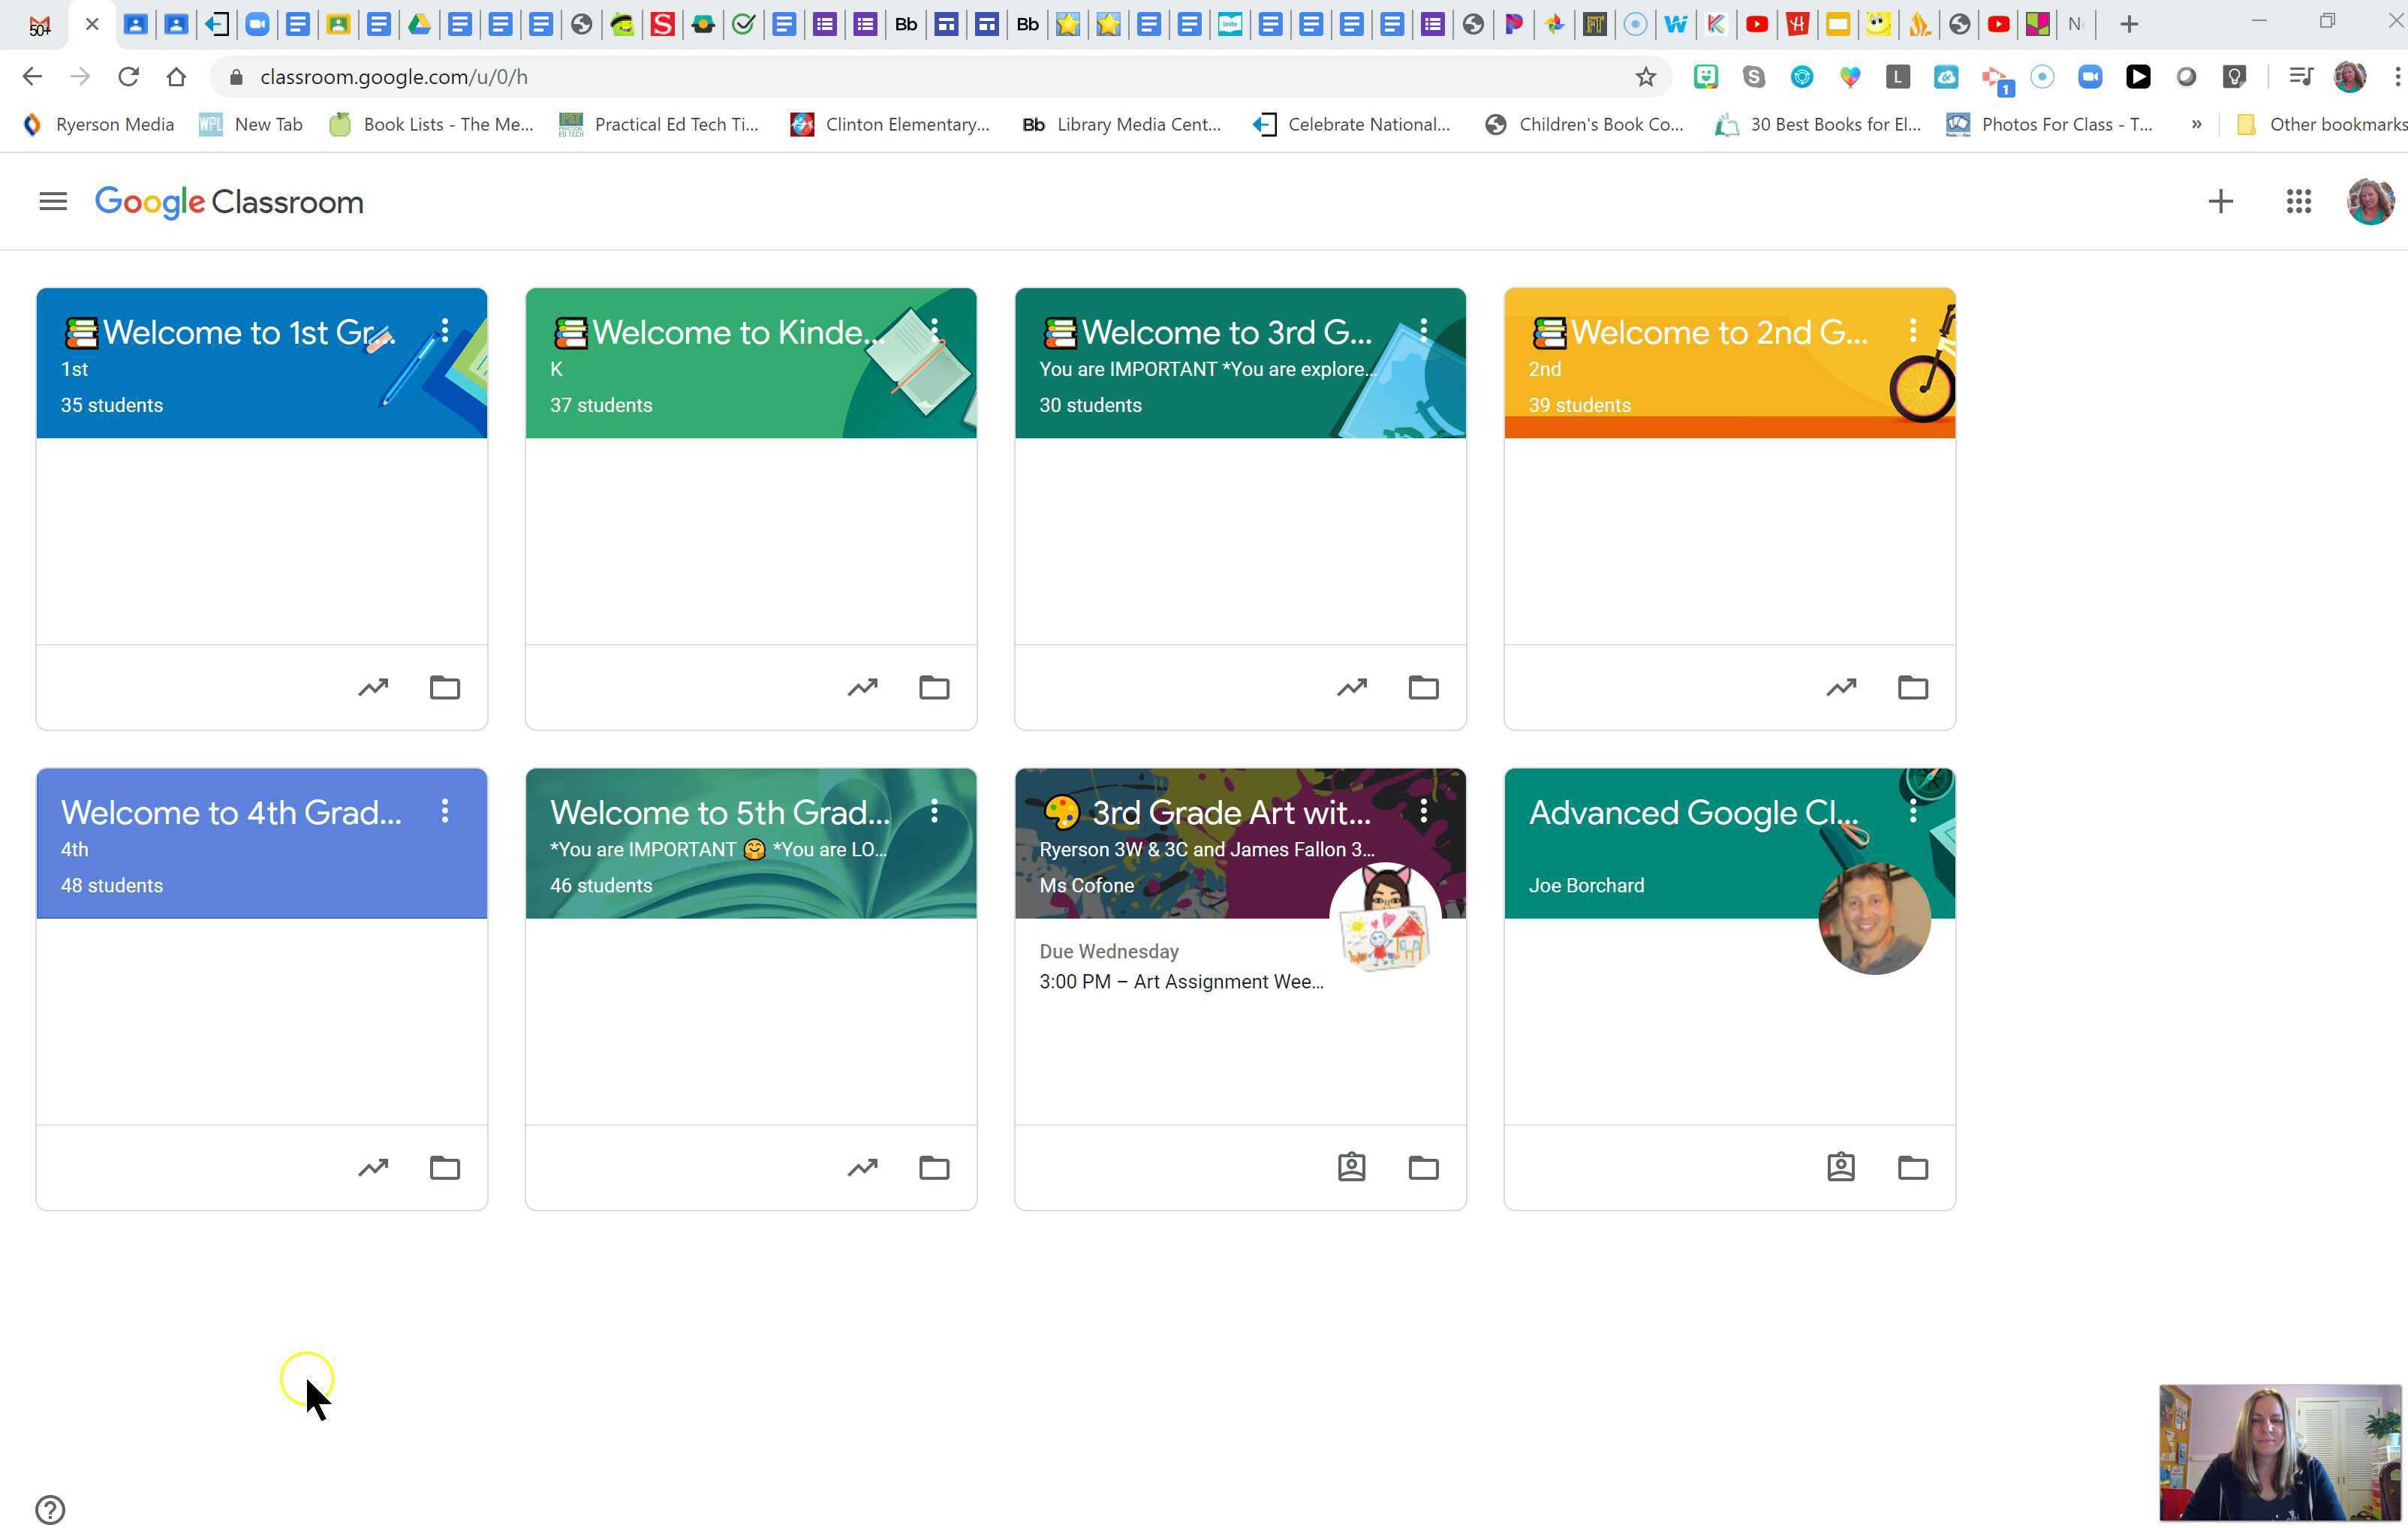 how to turn off email notifications for google classroom